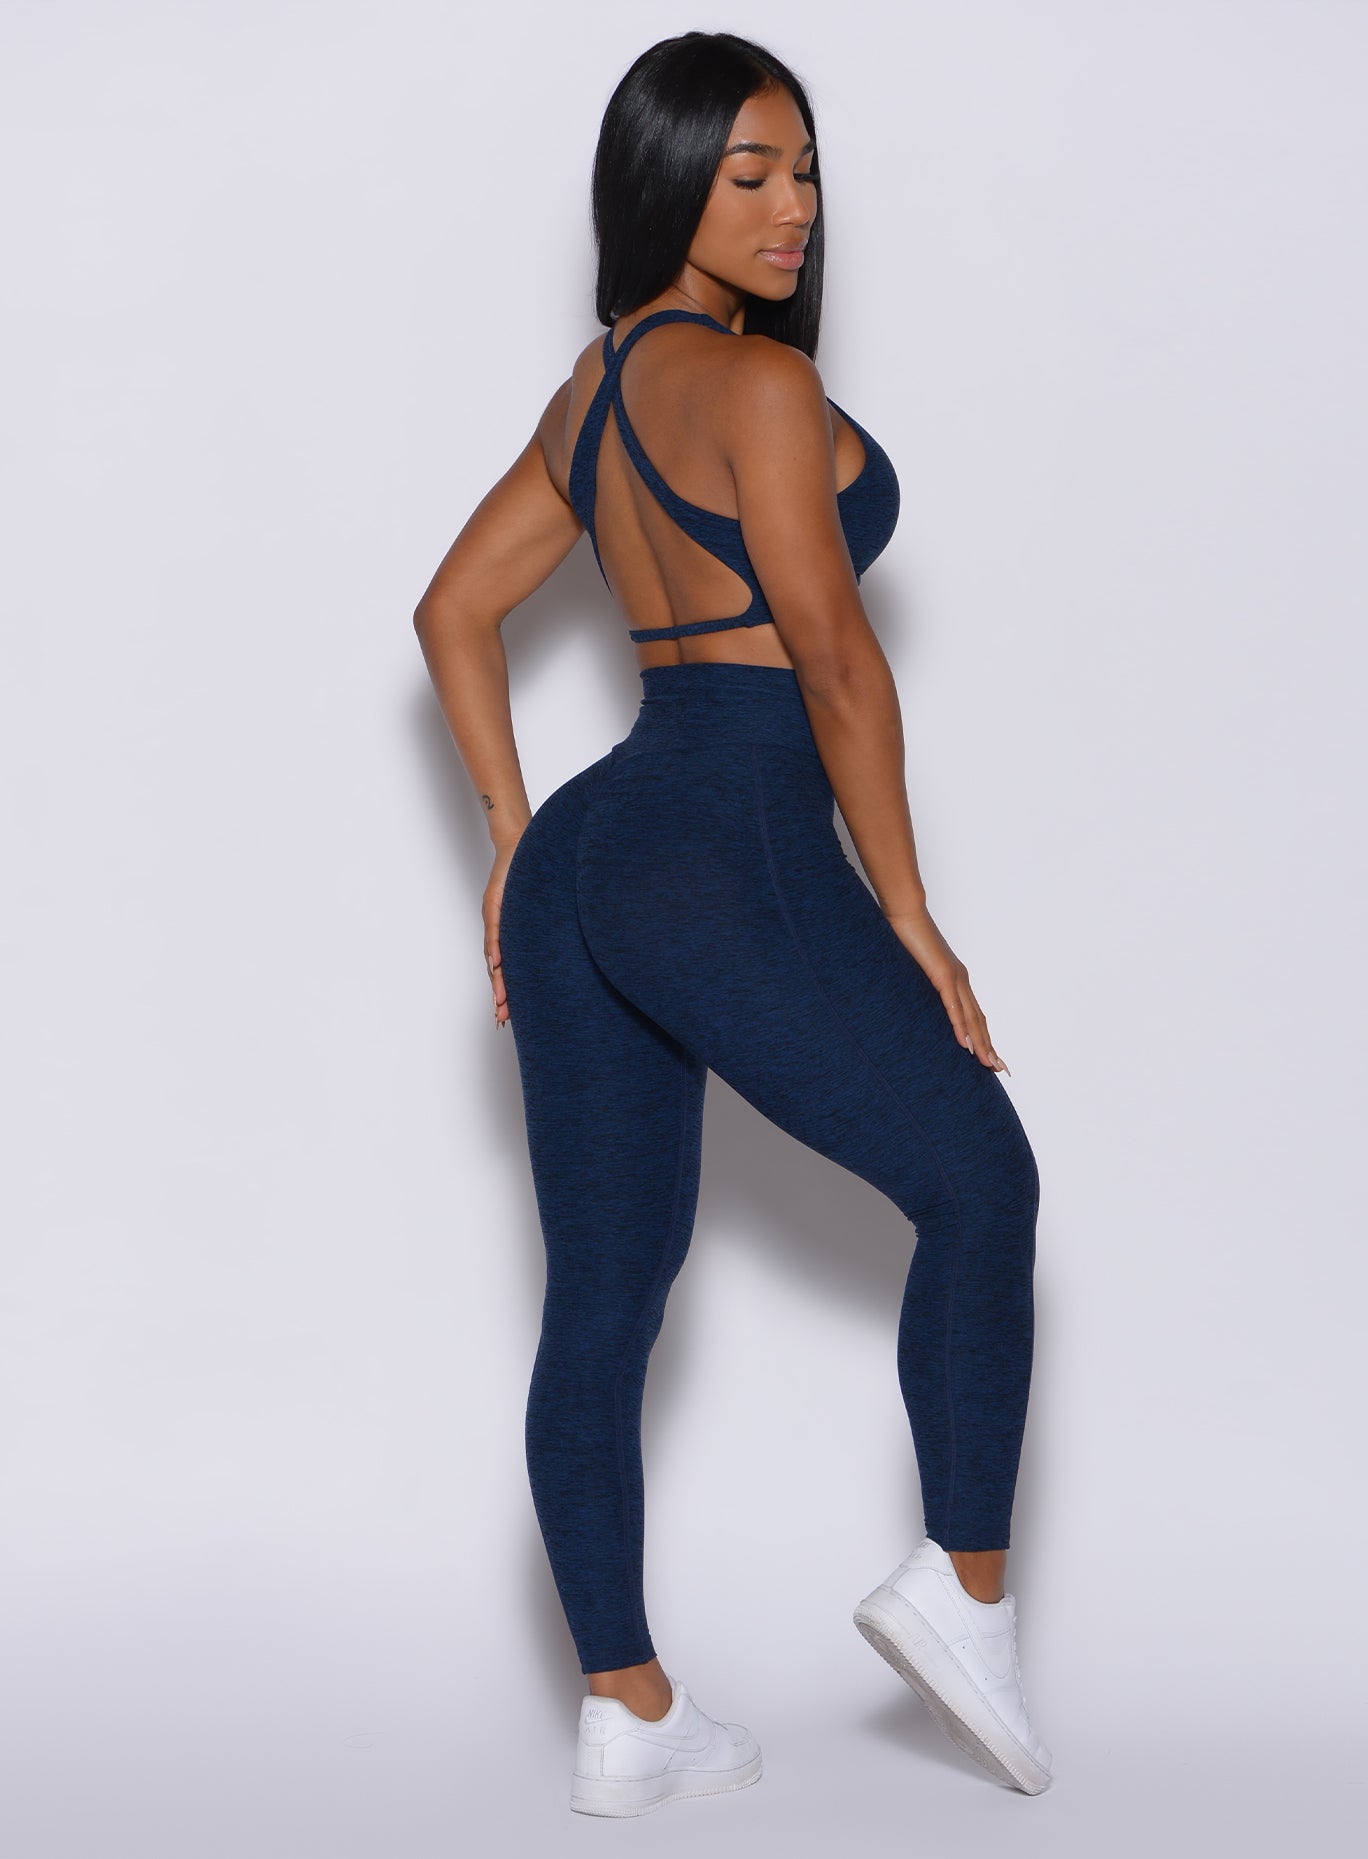 Right side  profile view of a model in our Brazilian Contour Leggings in sapphire blue color and a matching bra